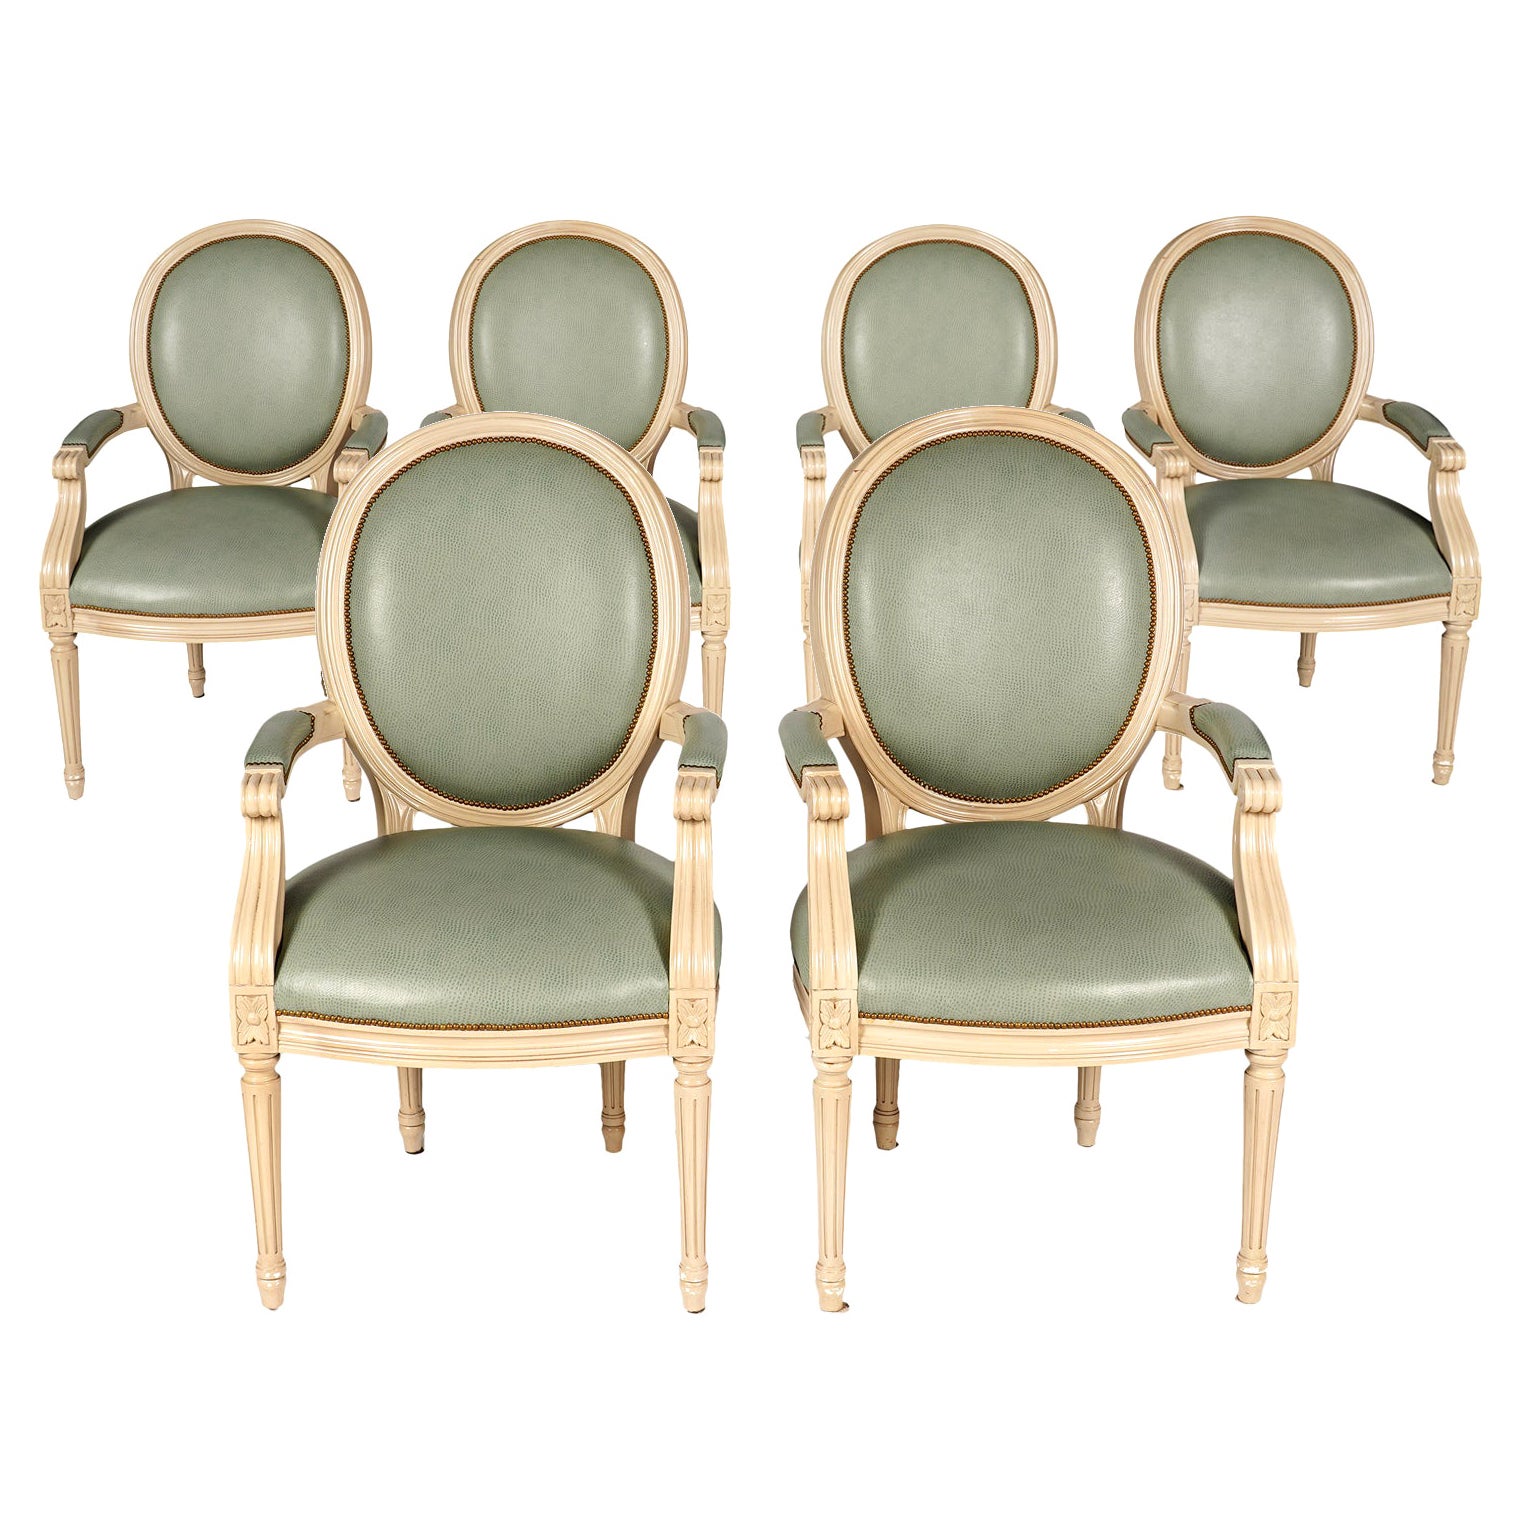 Group of Six Louis XVI Style Painted and upholstered Oval Back Armchairs, 20th C